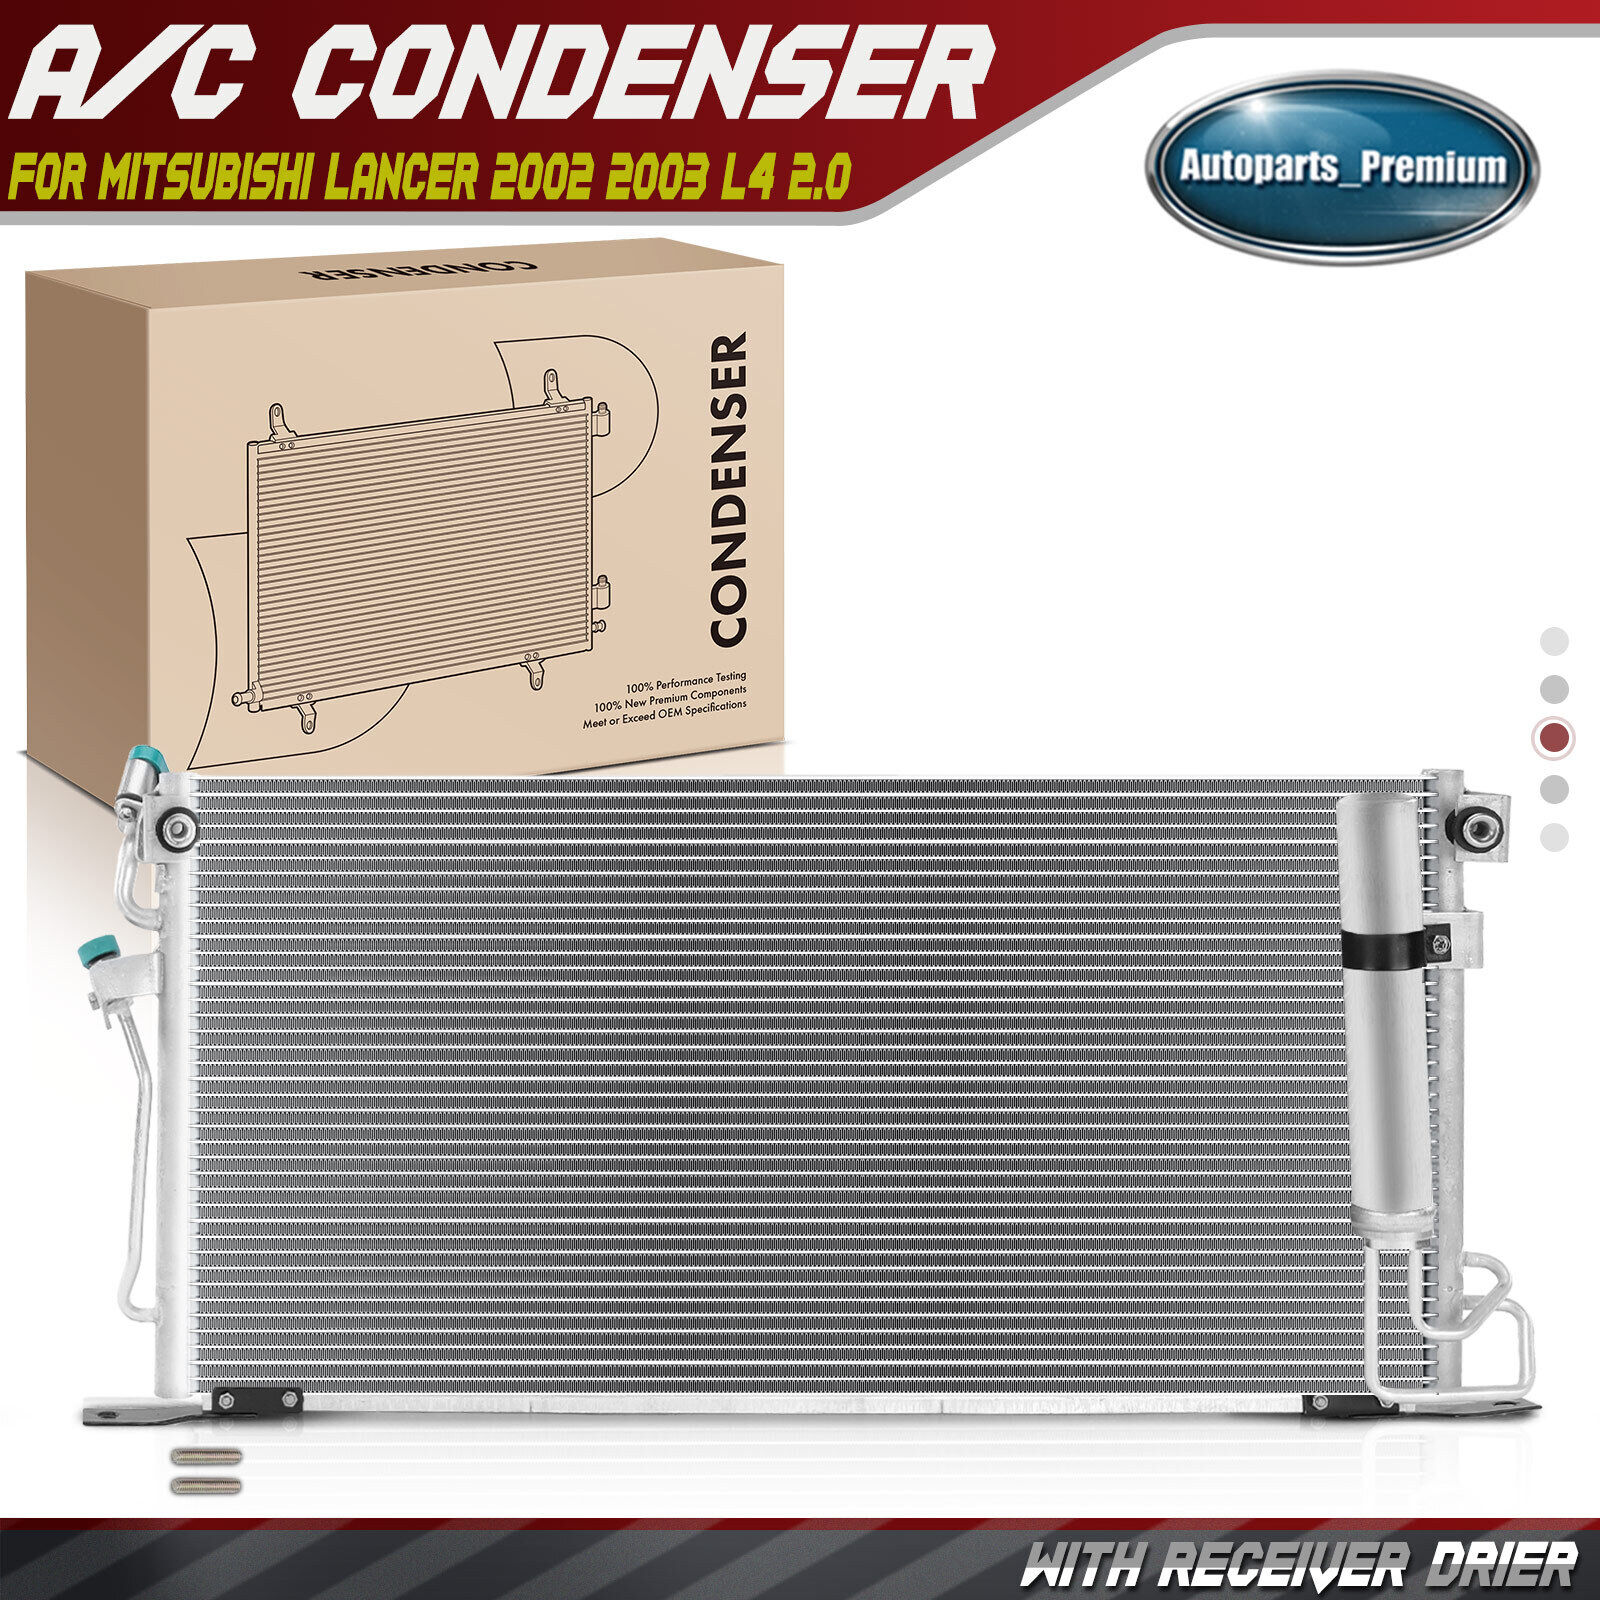 AC Condenser Parallel Flow with Receiver Drier for Mitsubishi Lancer 2002 2003